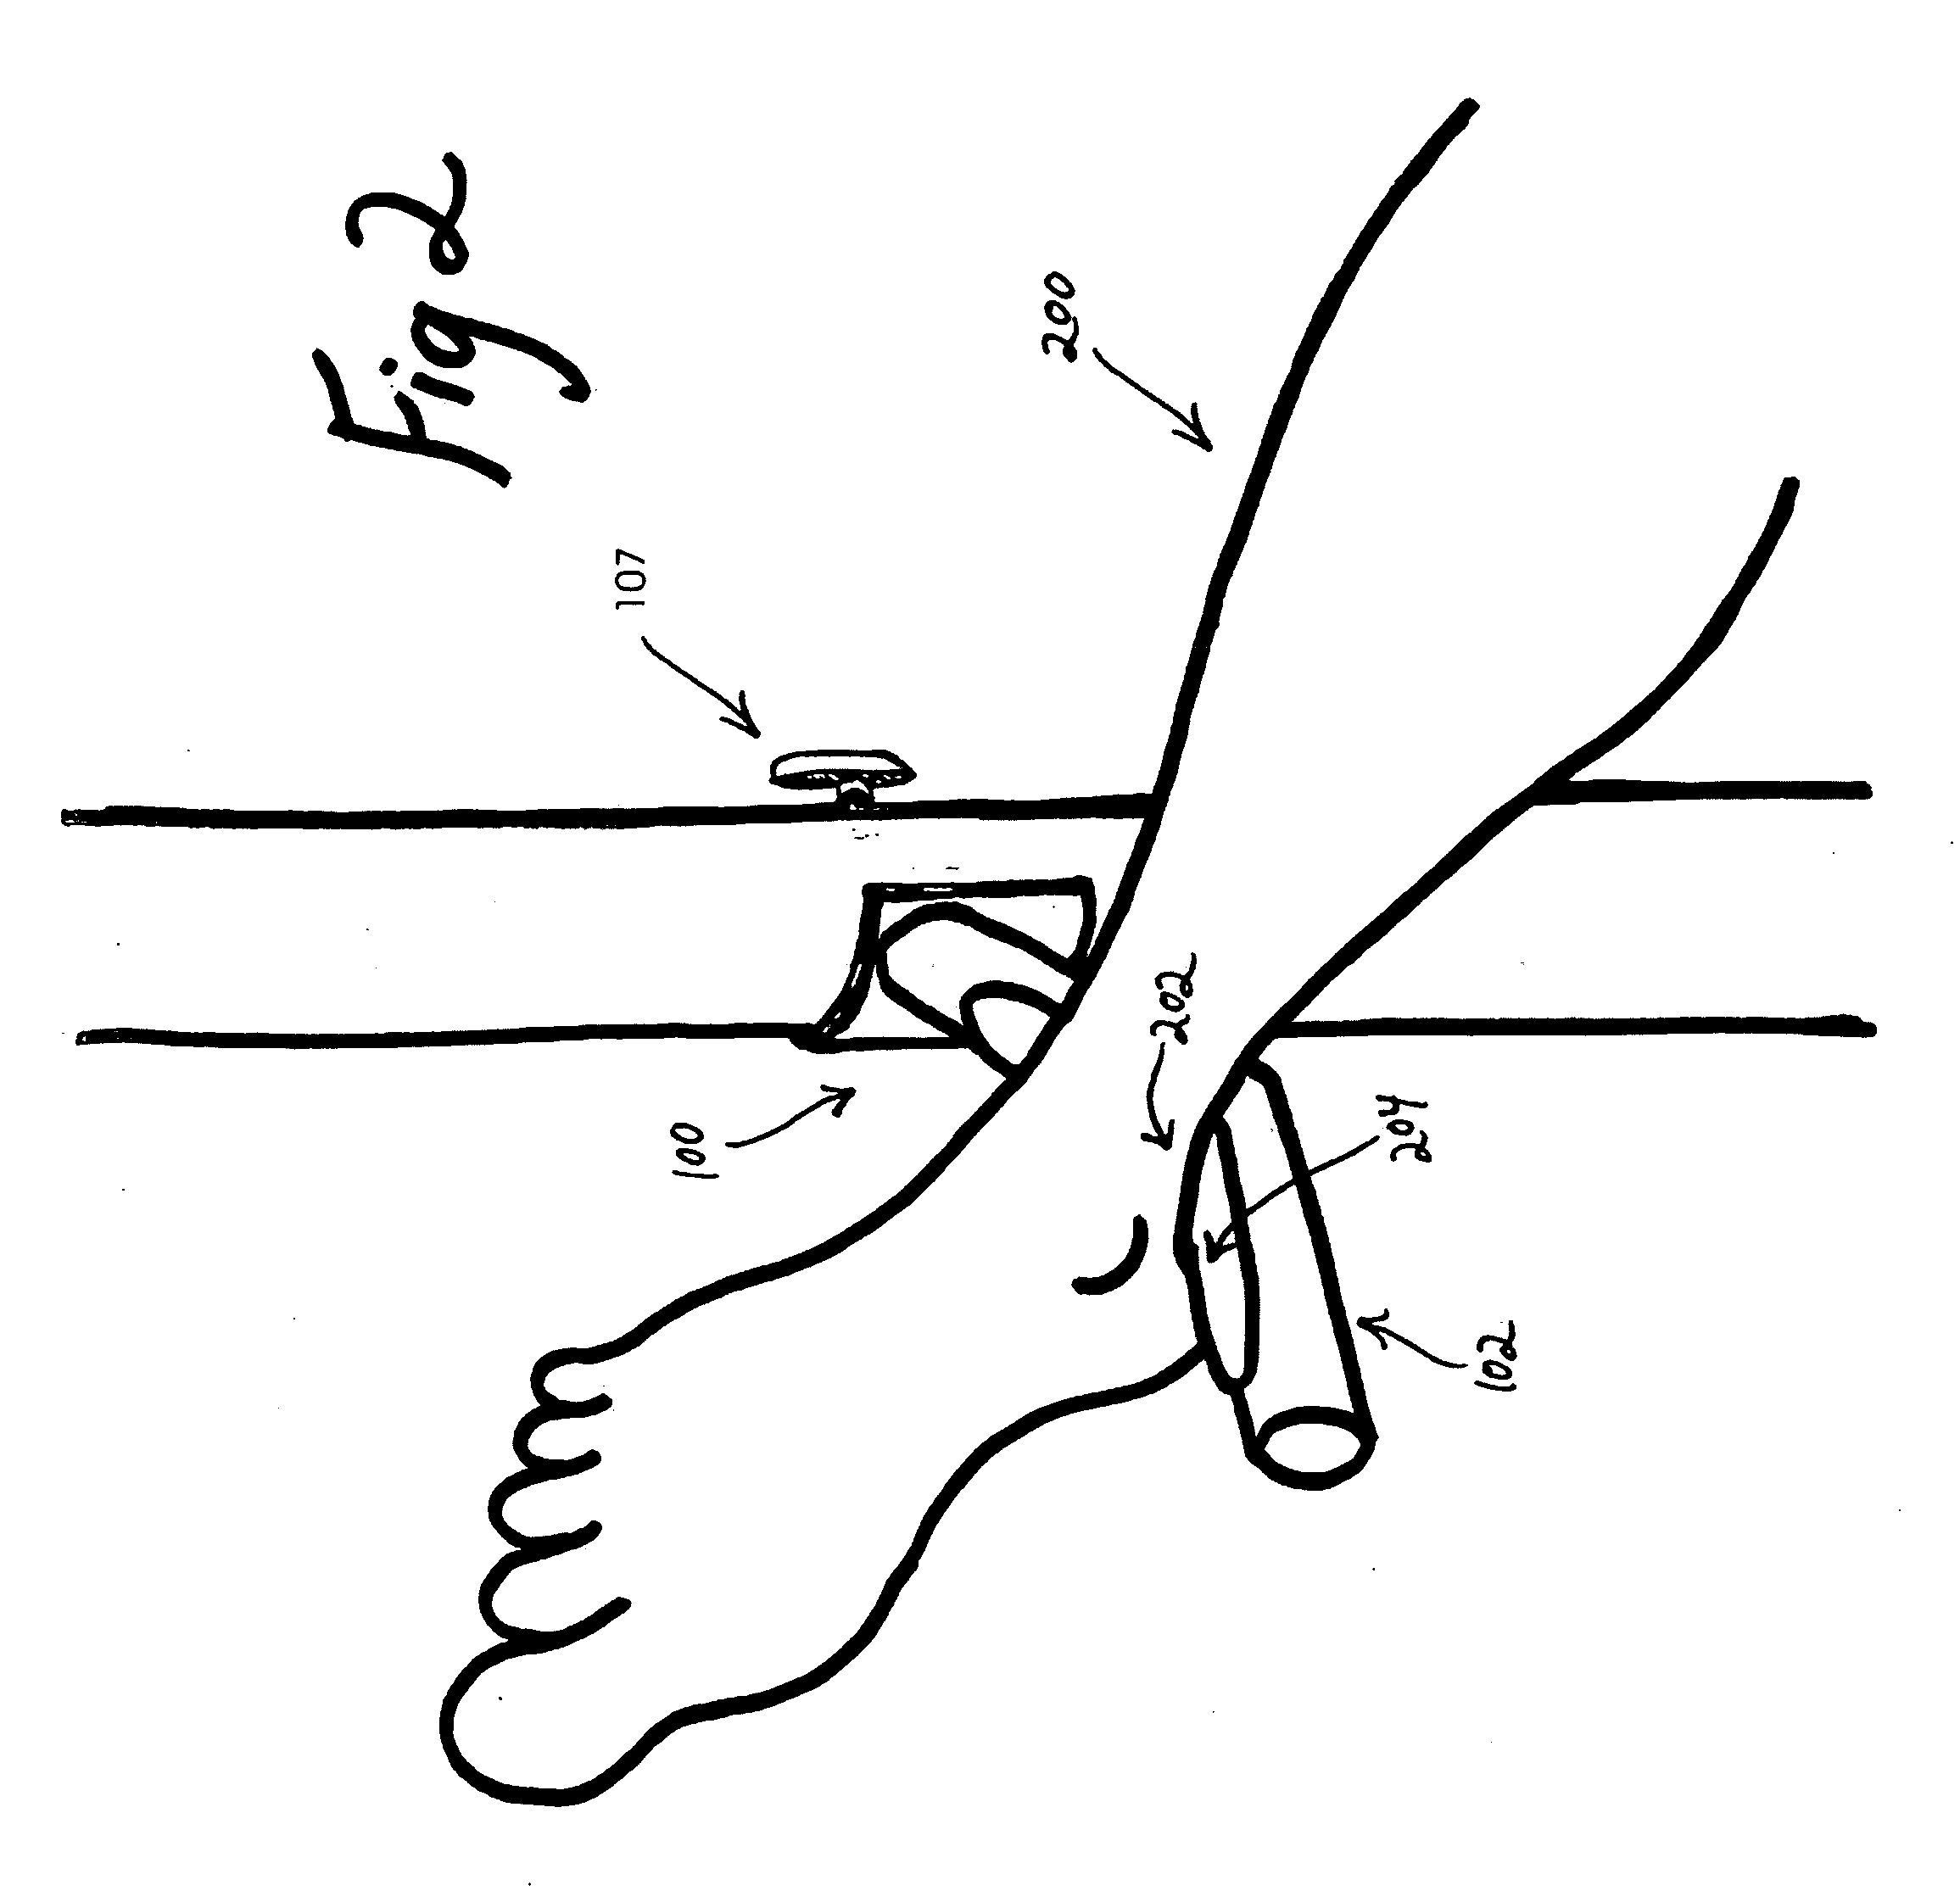 Medical device for supporting limbs